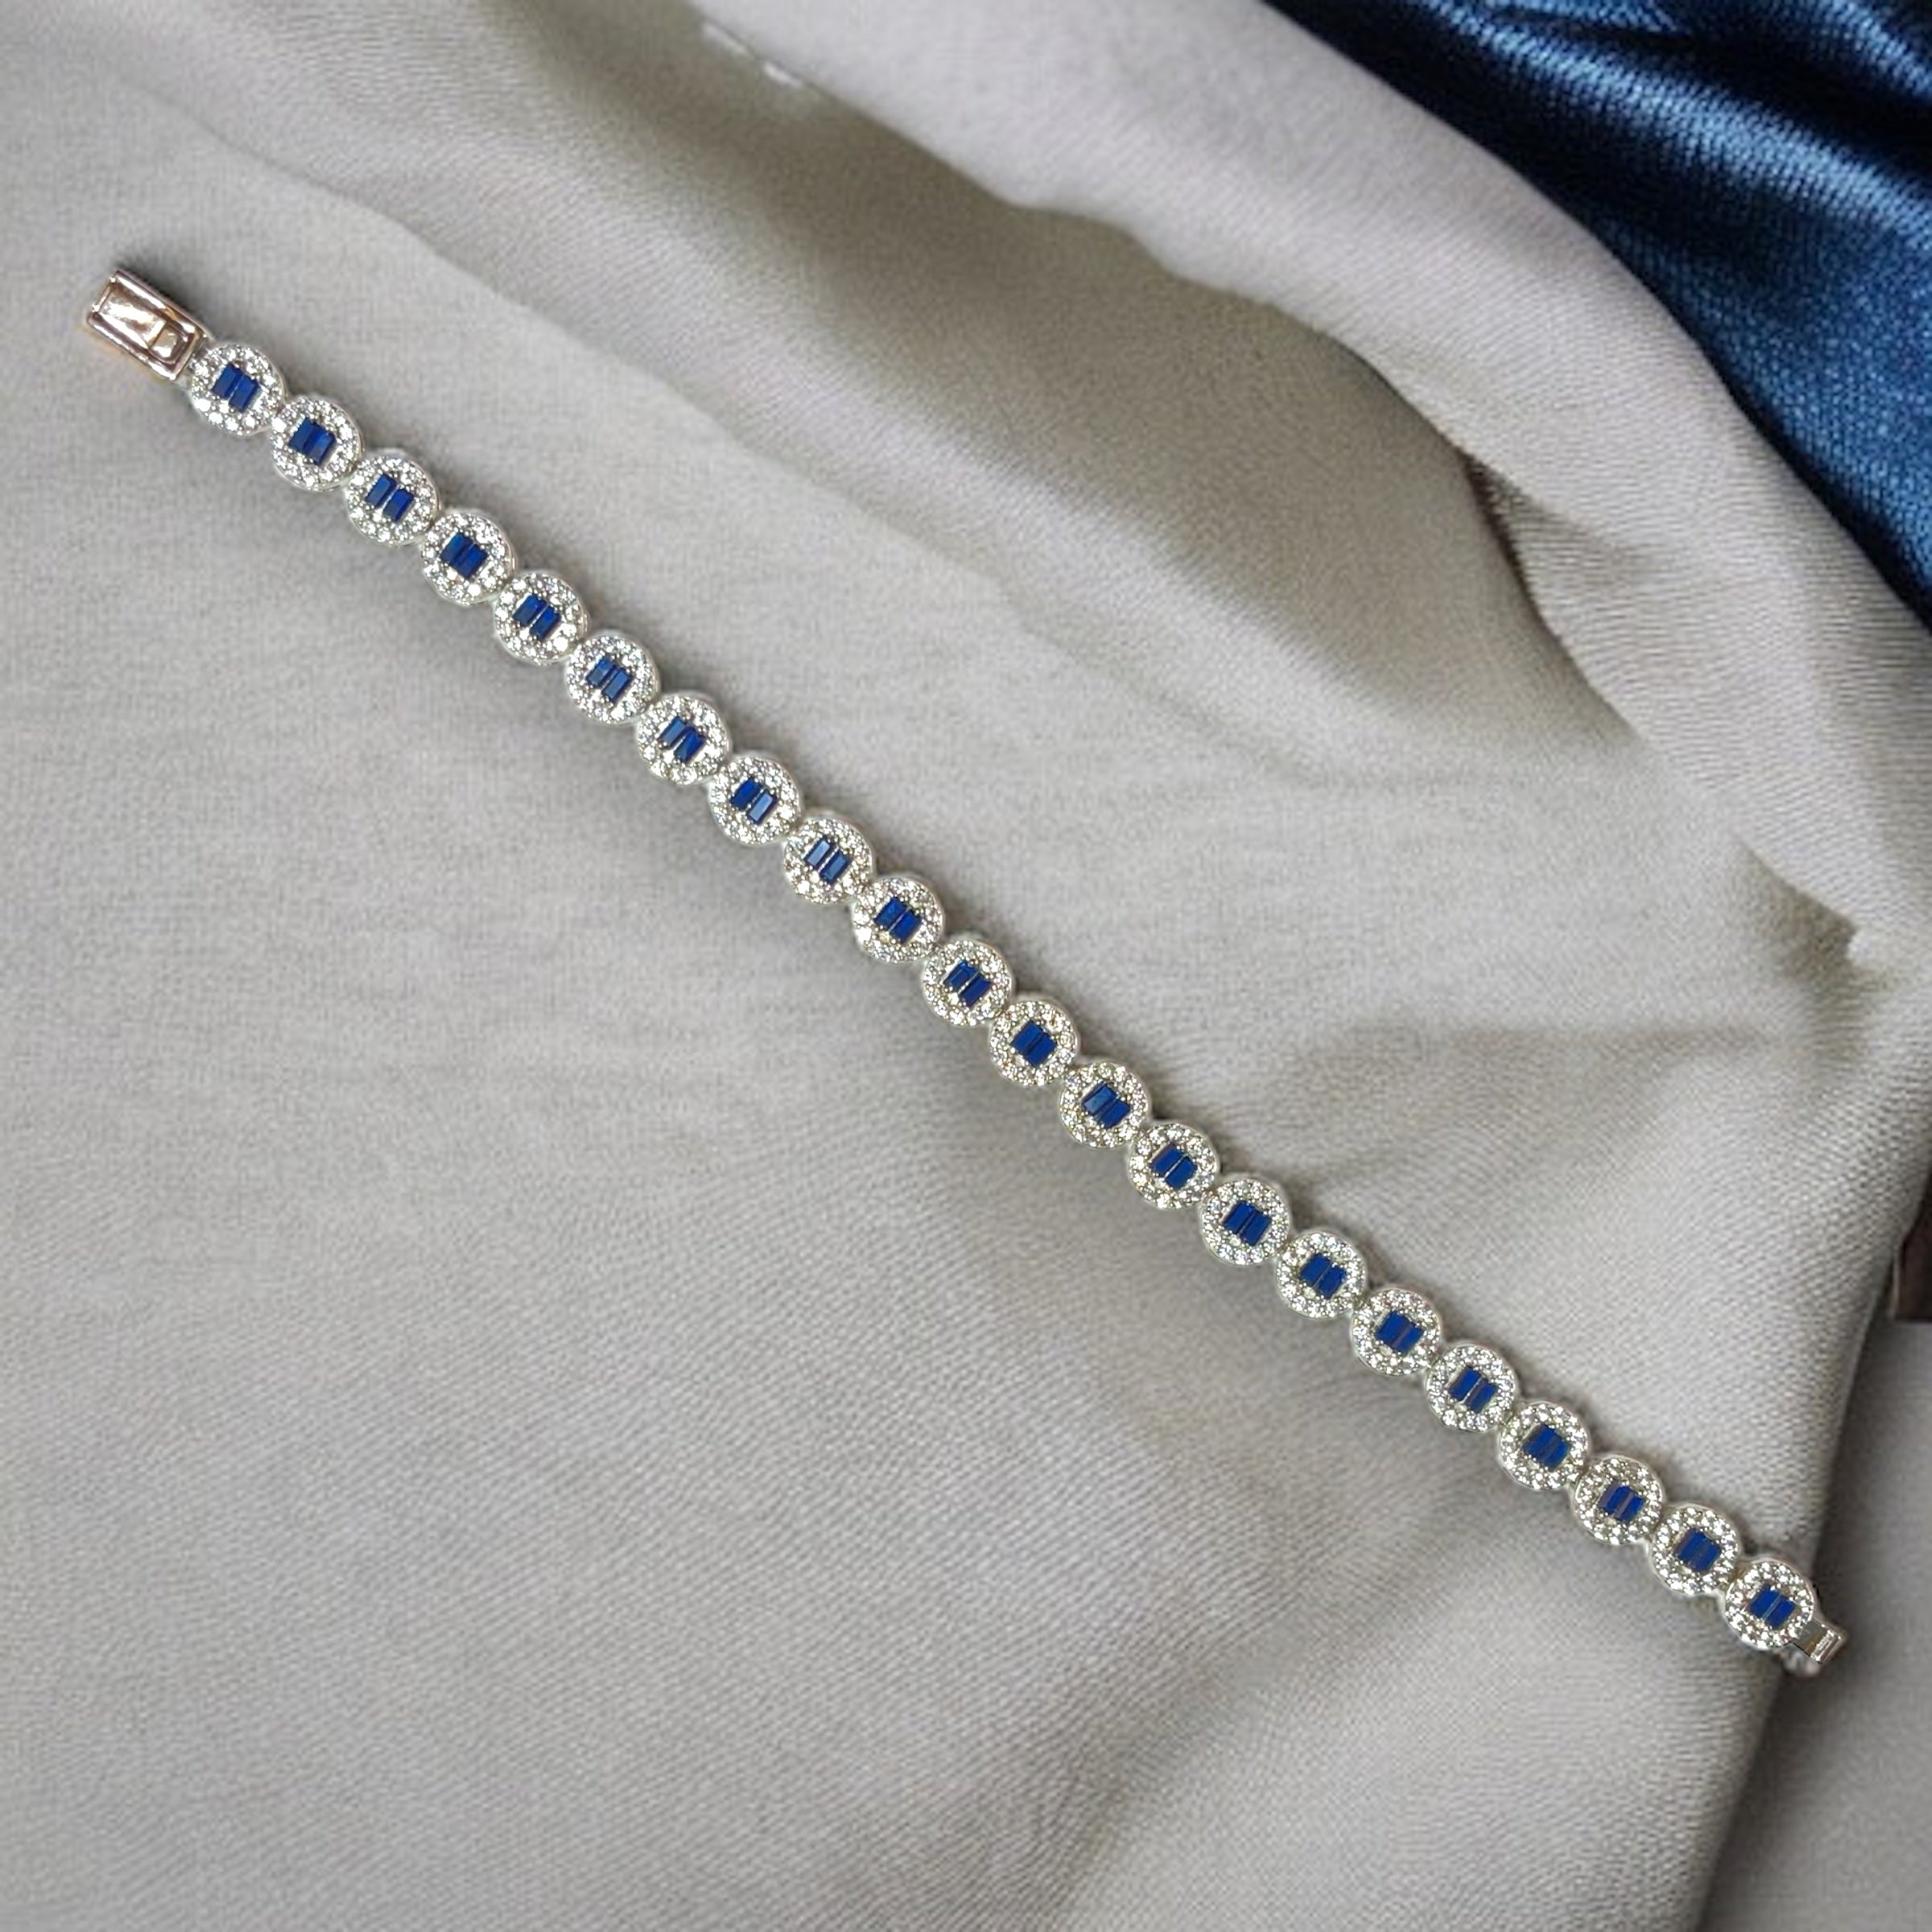 a blue and white bracelet laying on top of a white cloth